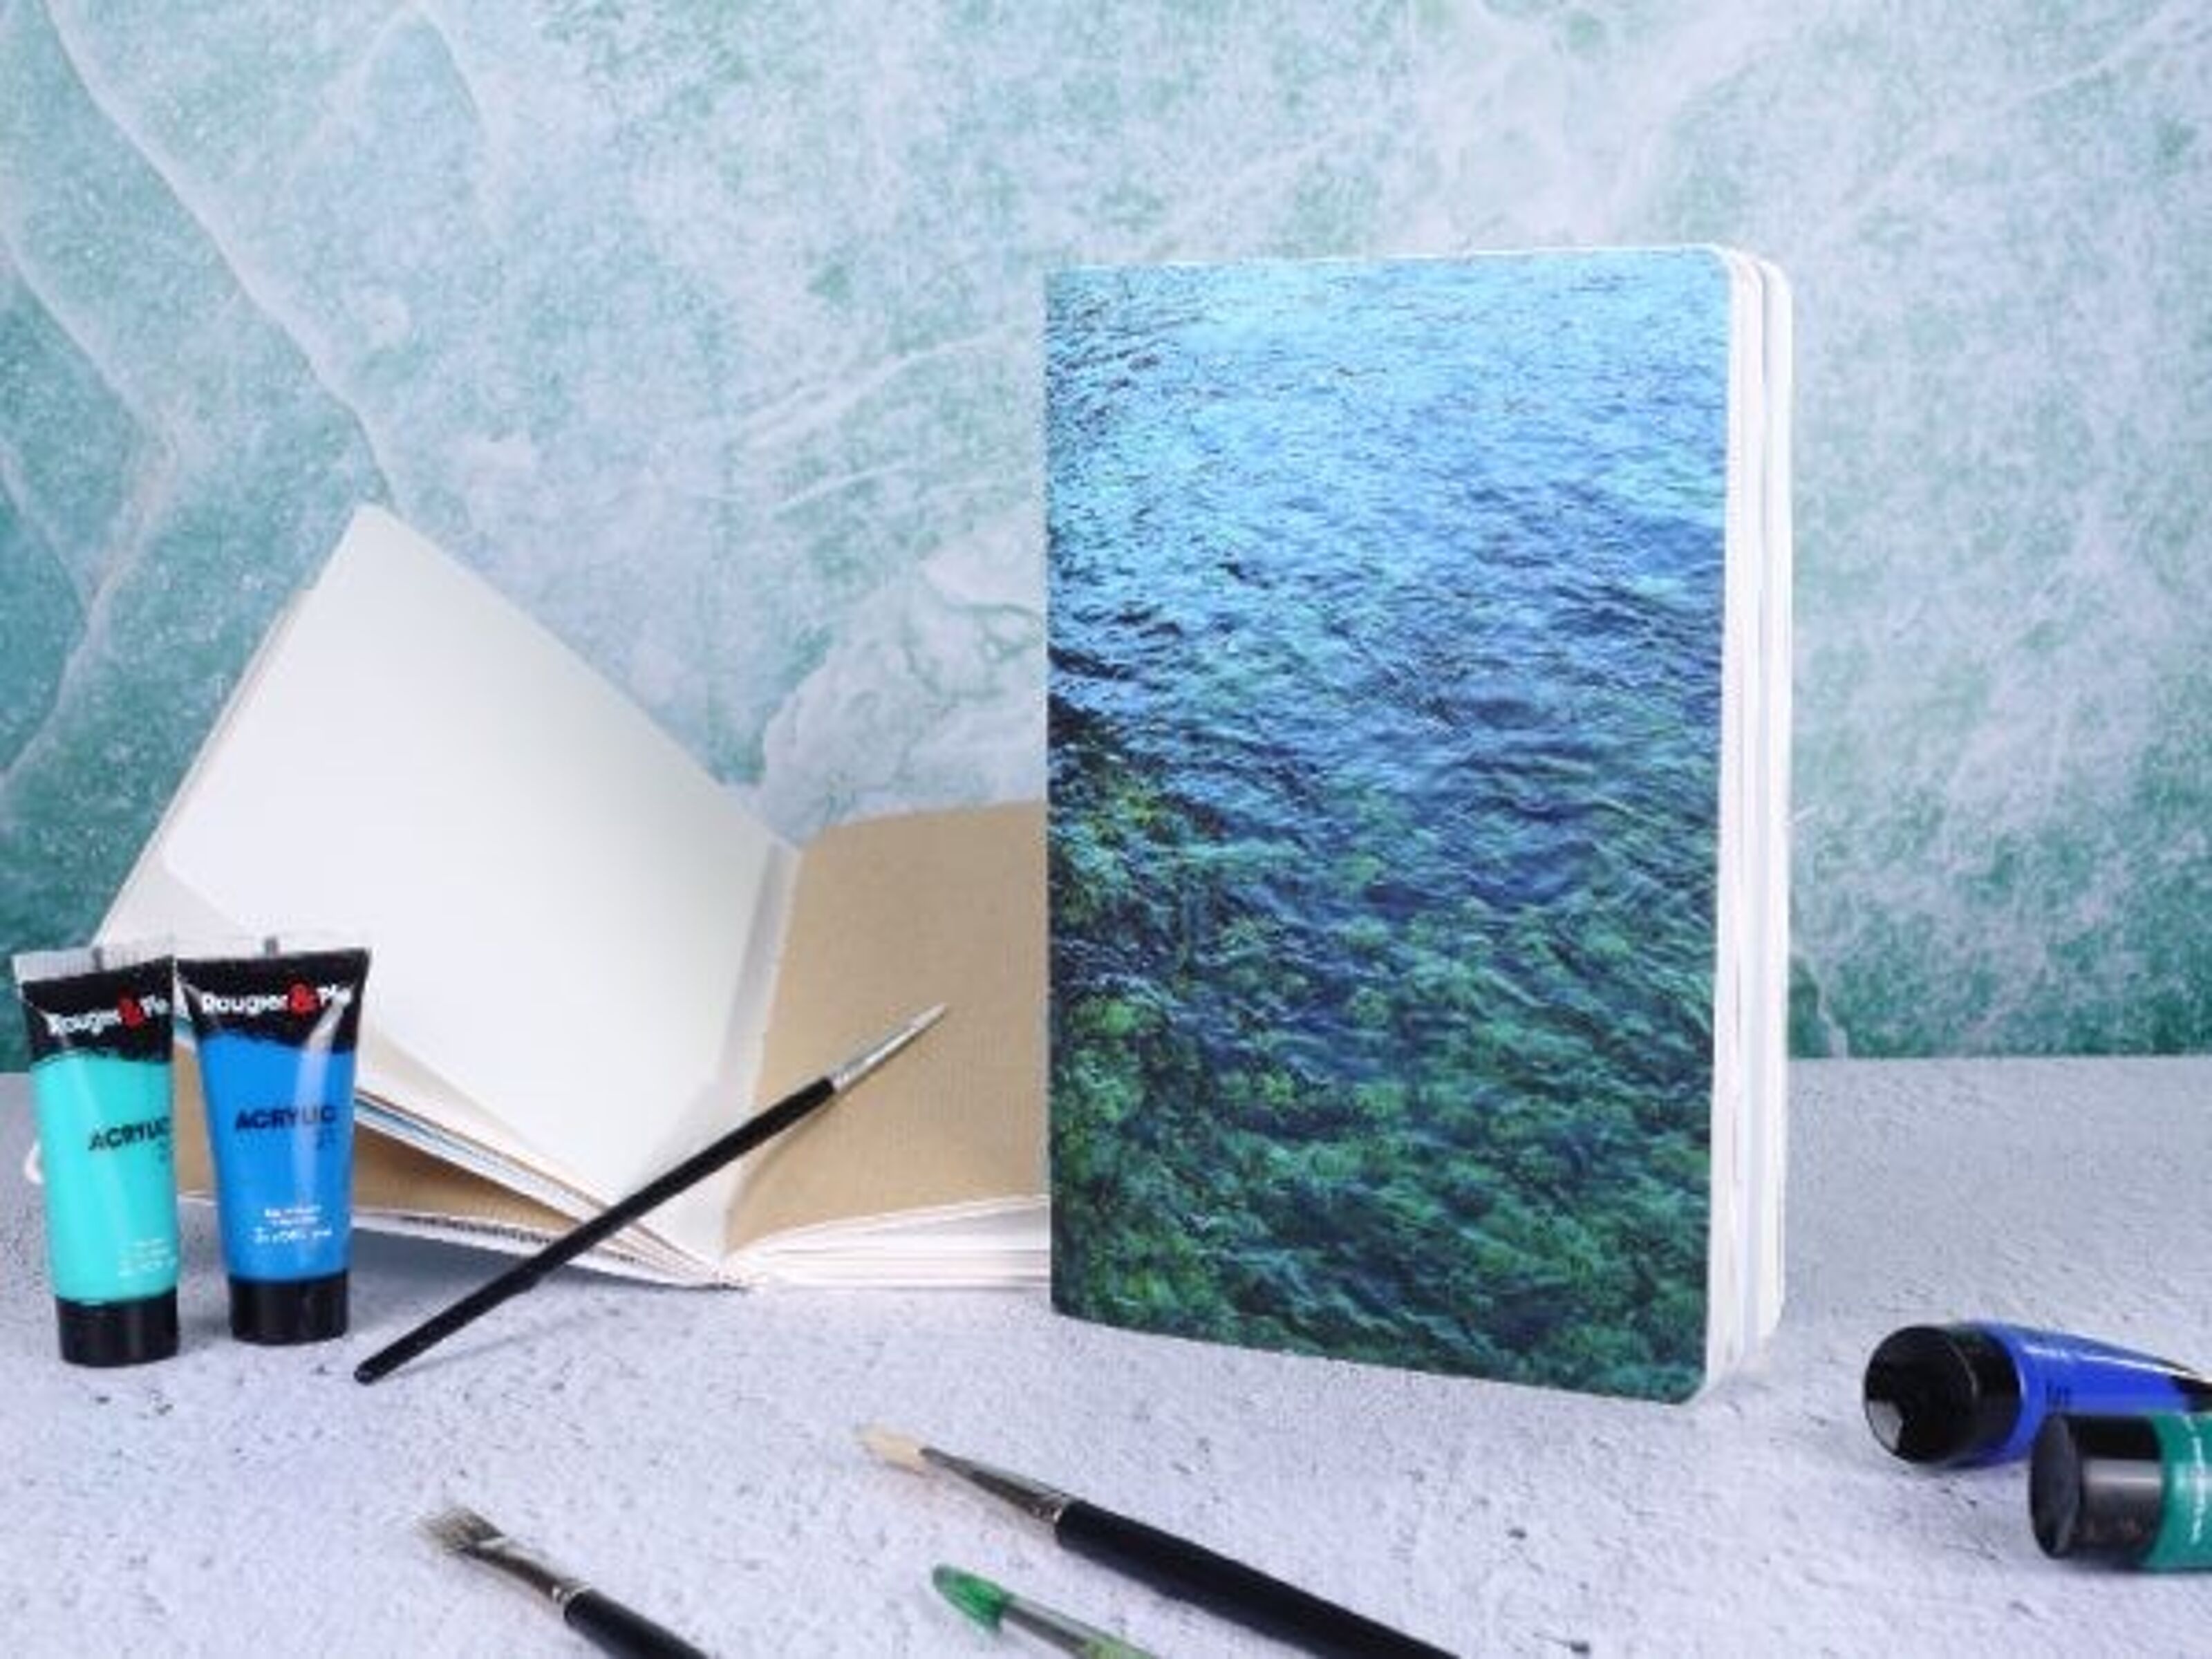 Express Yourself with A Wholesale moleskine sketchbook from